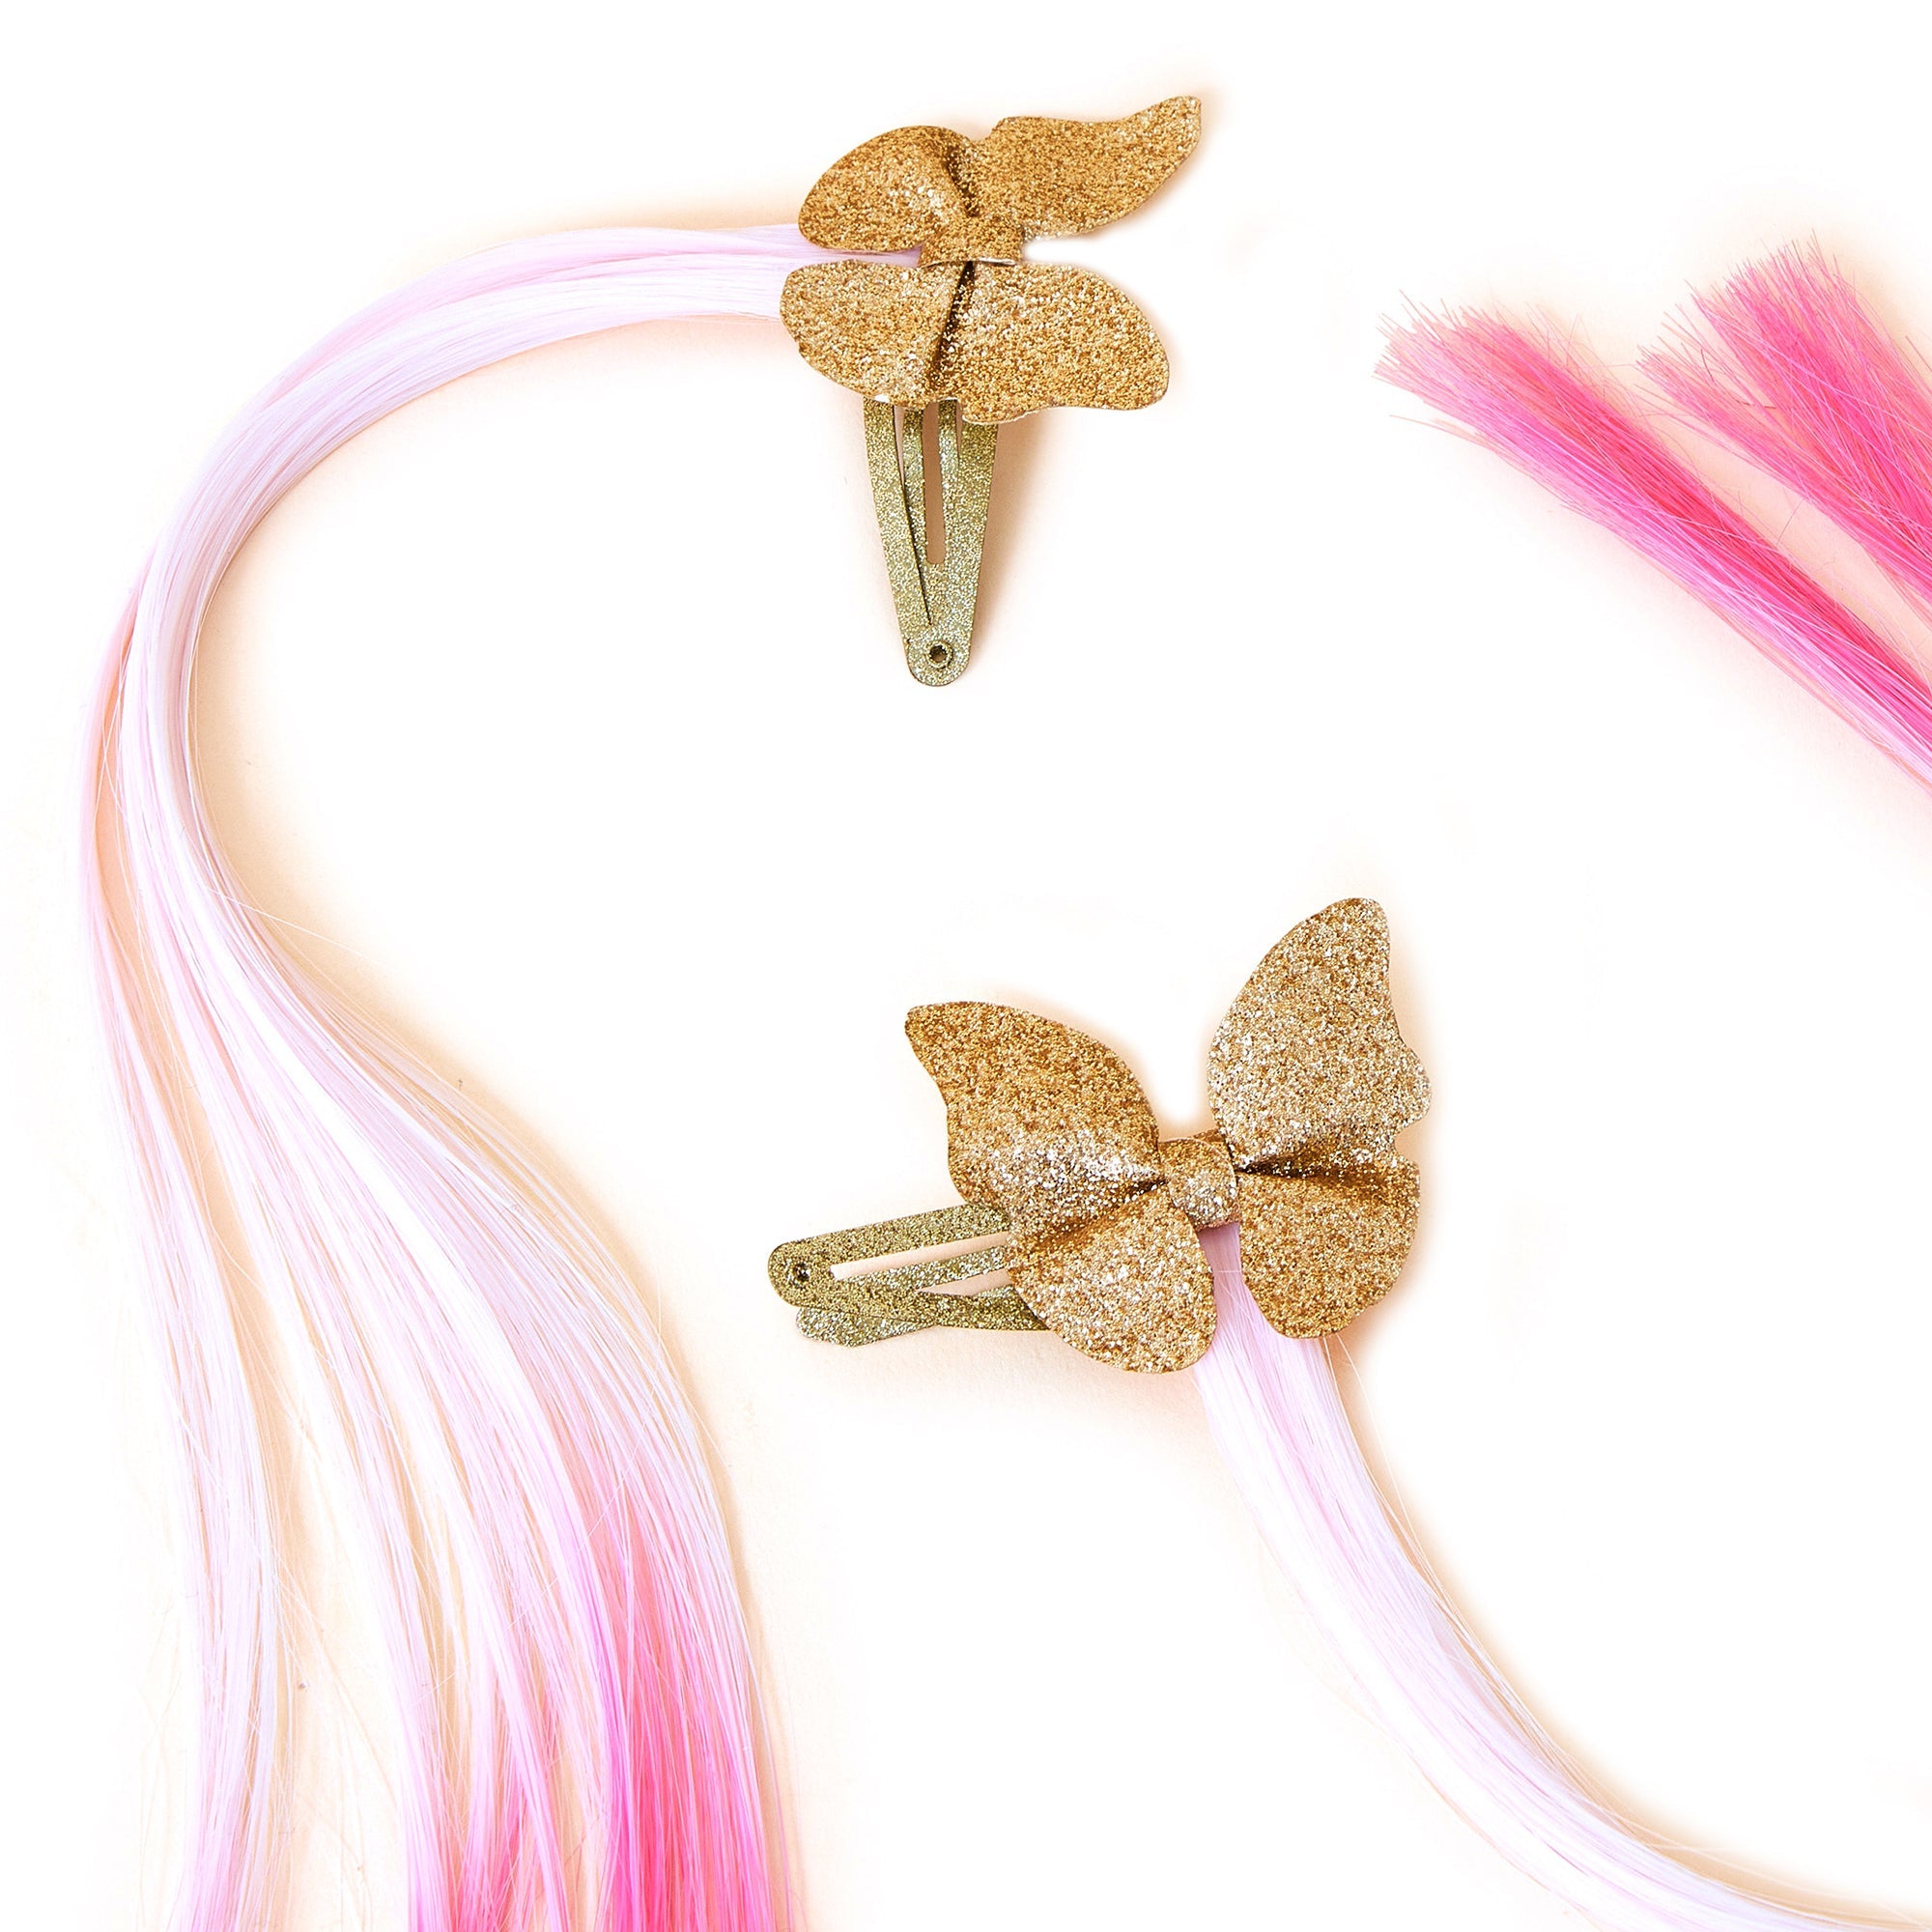 Accessorize London Girl's R Butterfly Fake Hair Clips